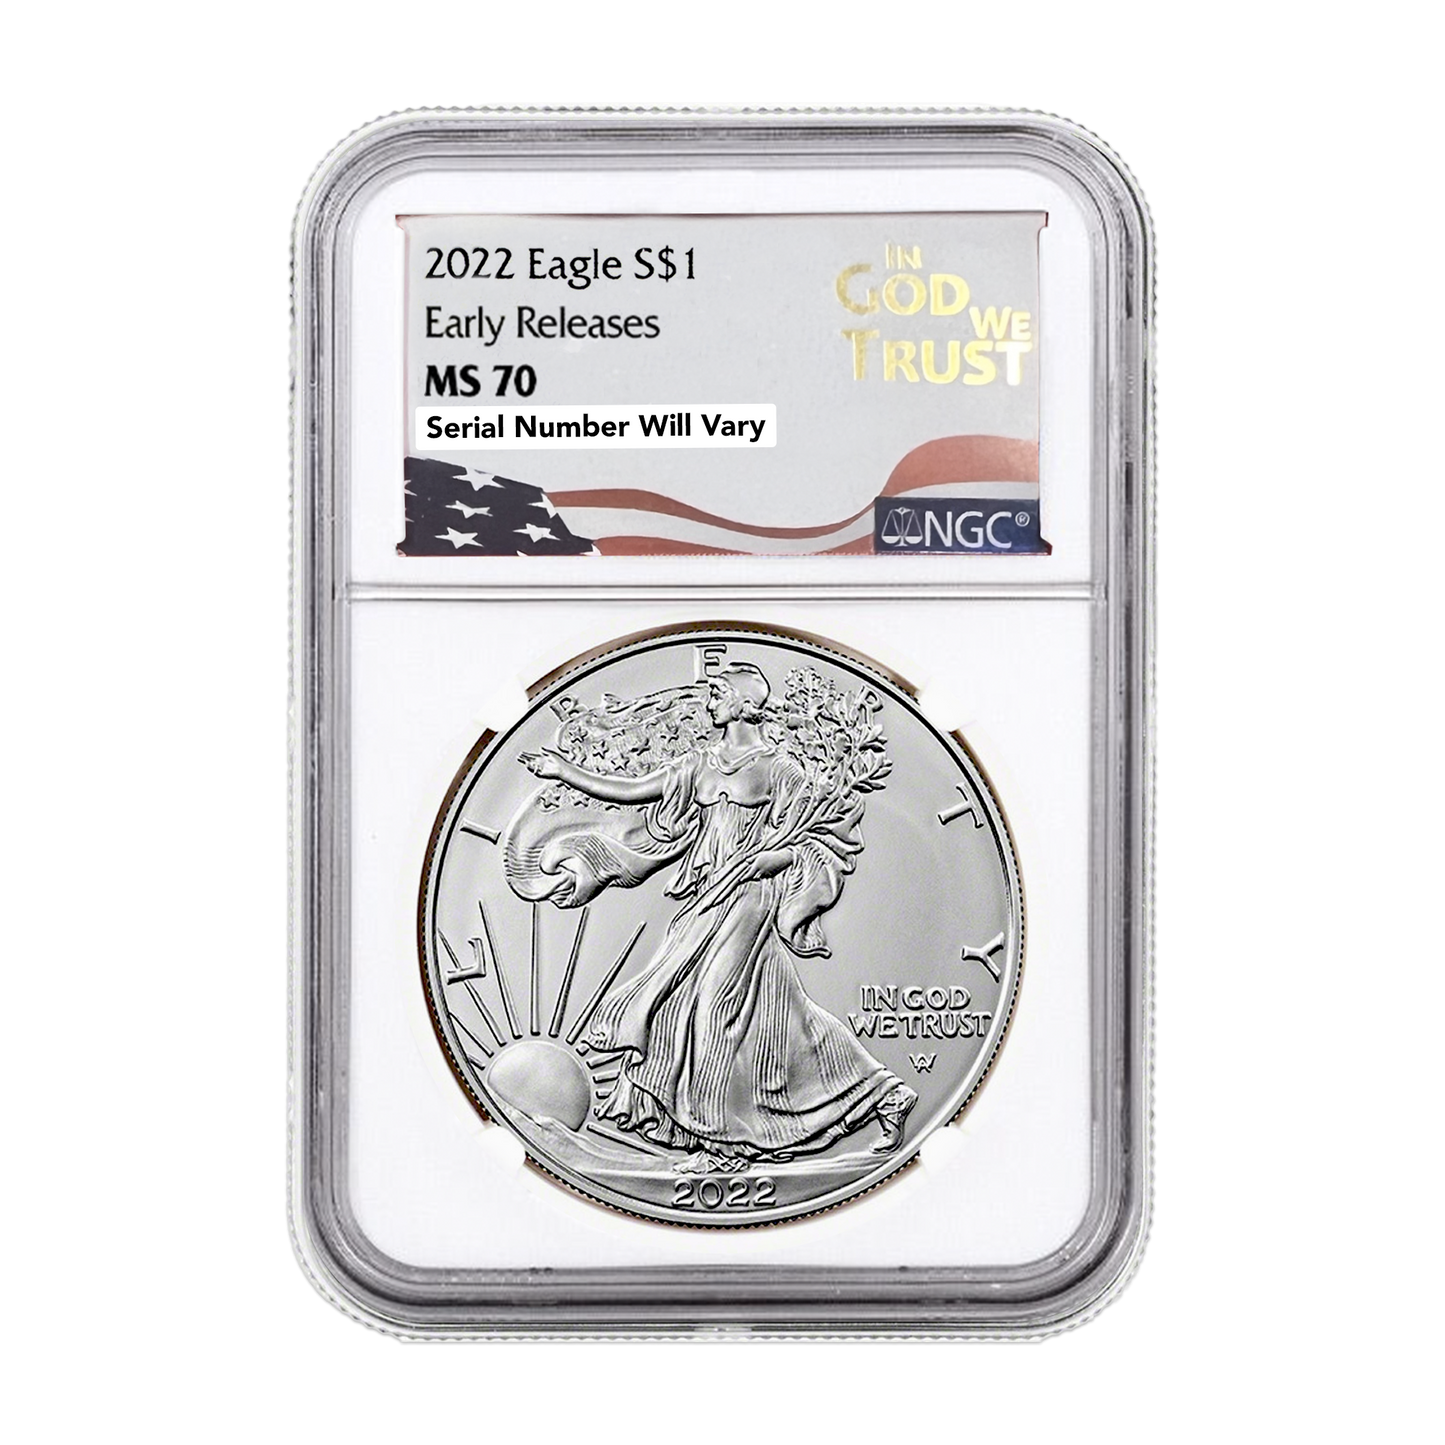 2022 Silver Eagle In God We Trust Label - NGC MS70 Early Release